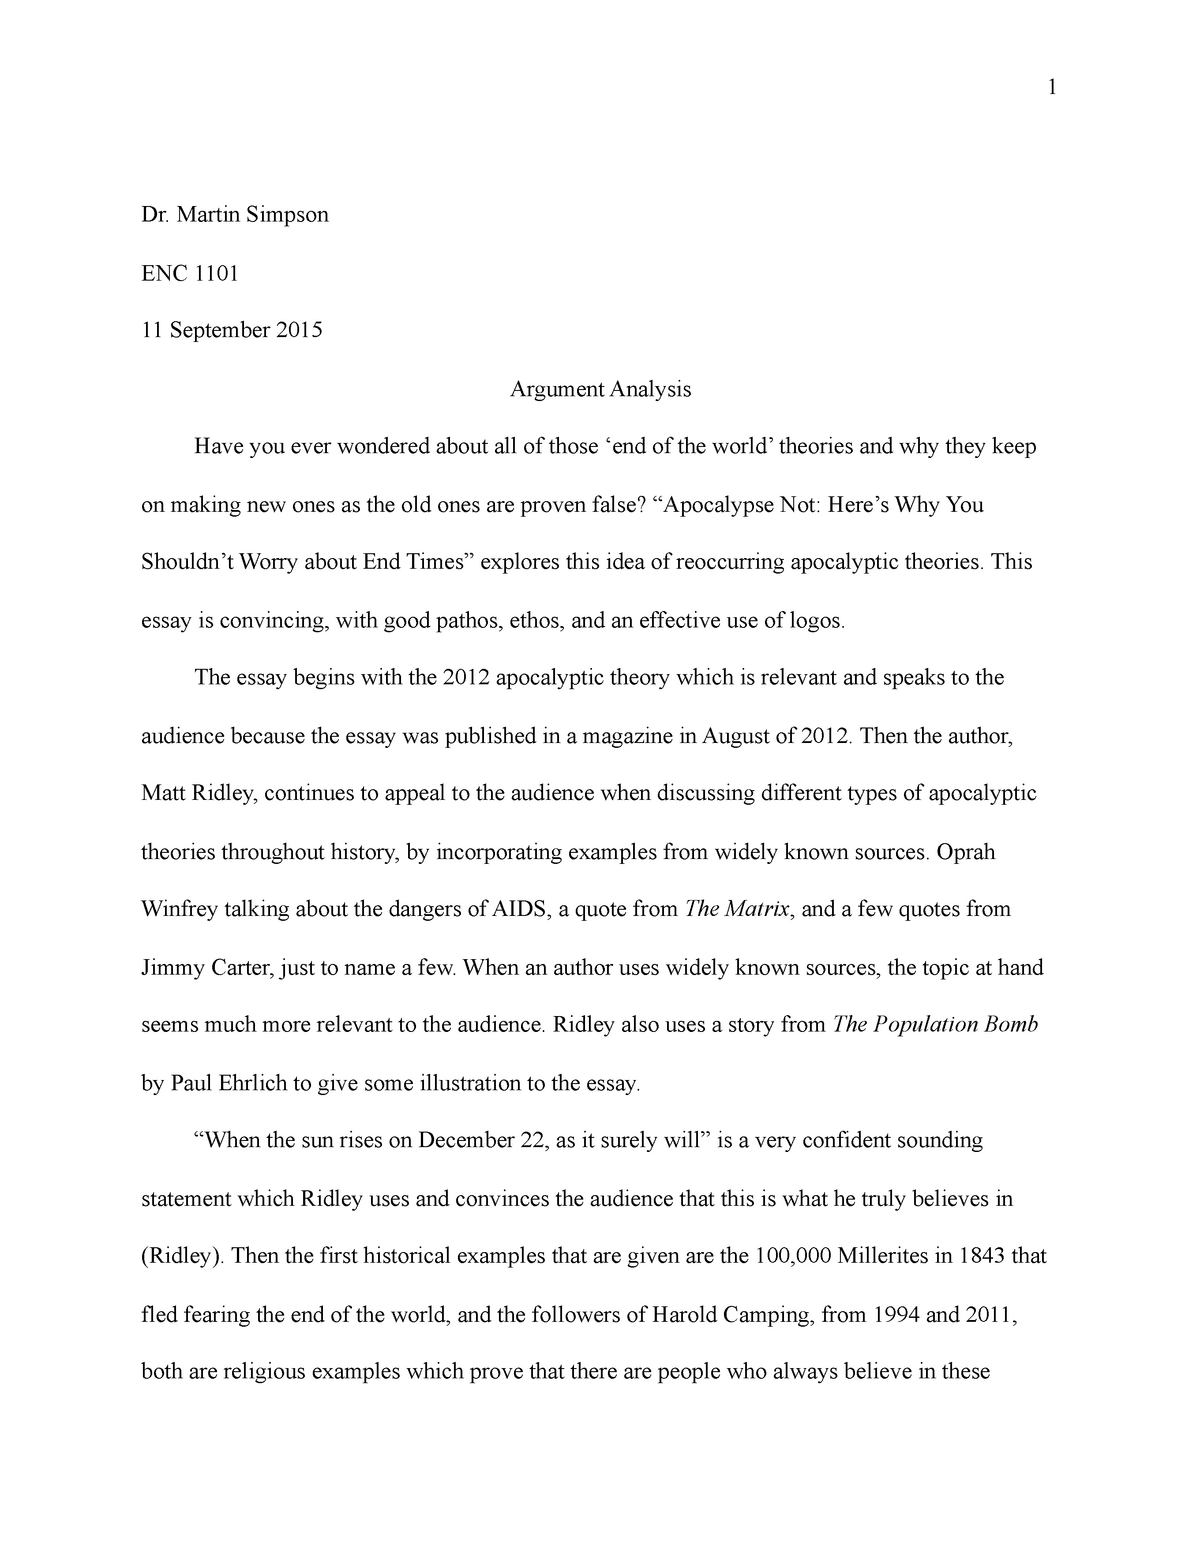 The perfect essay